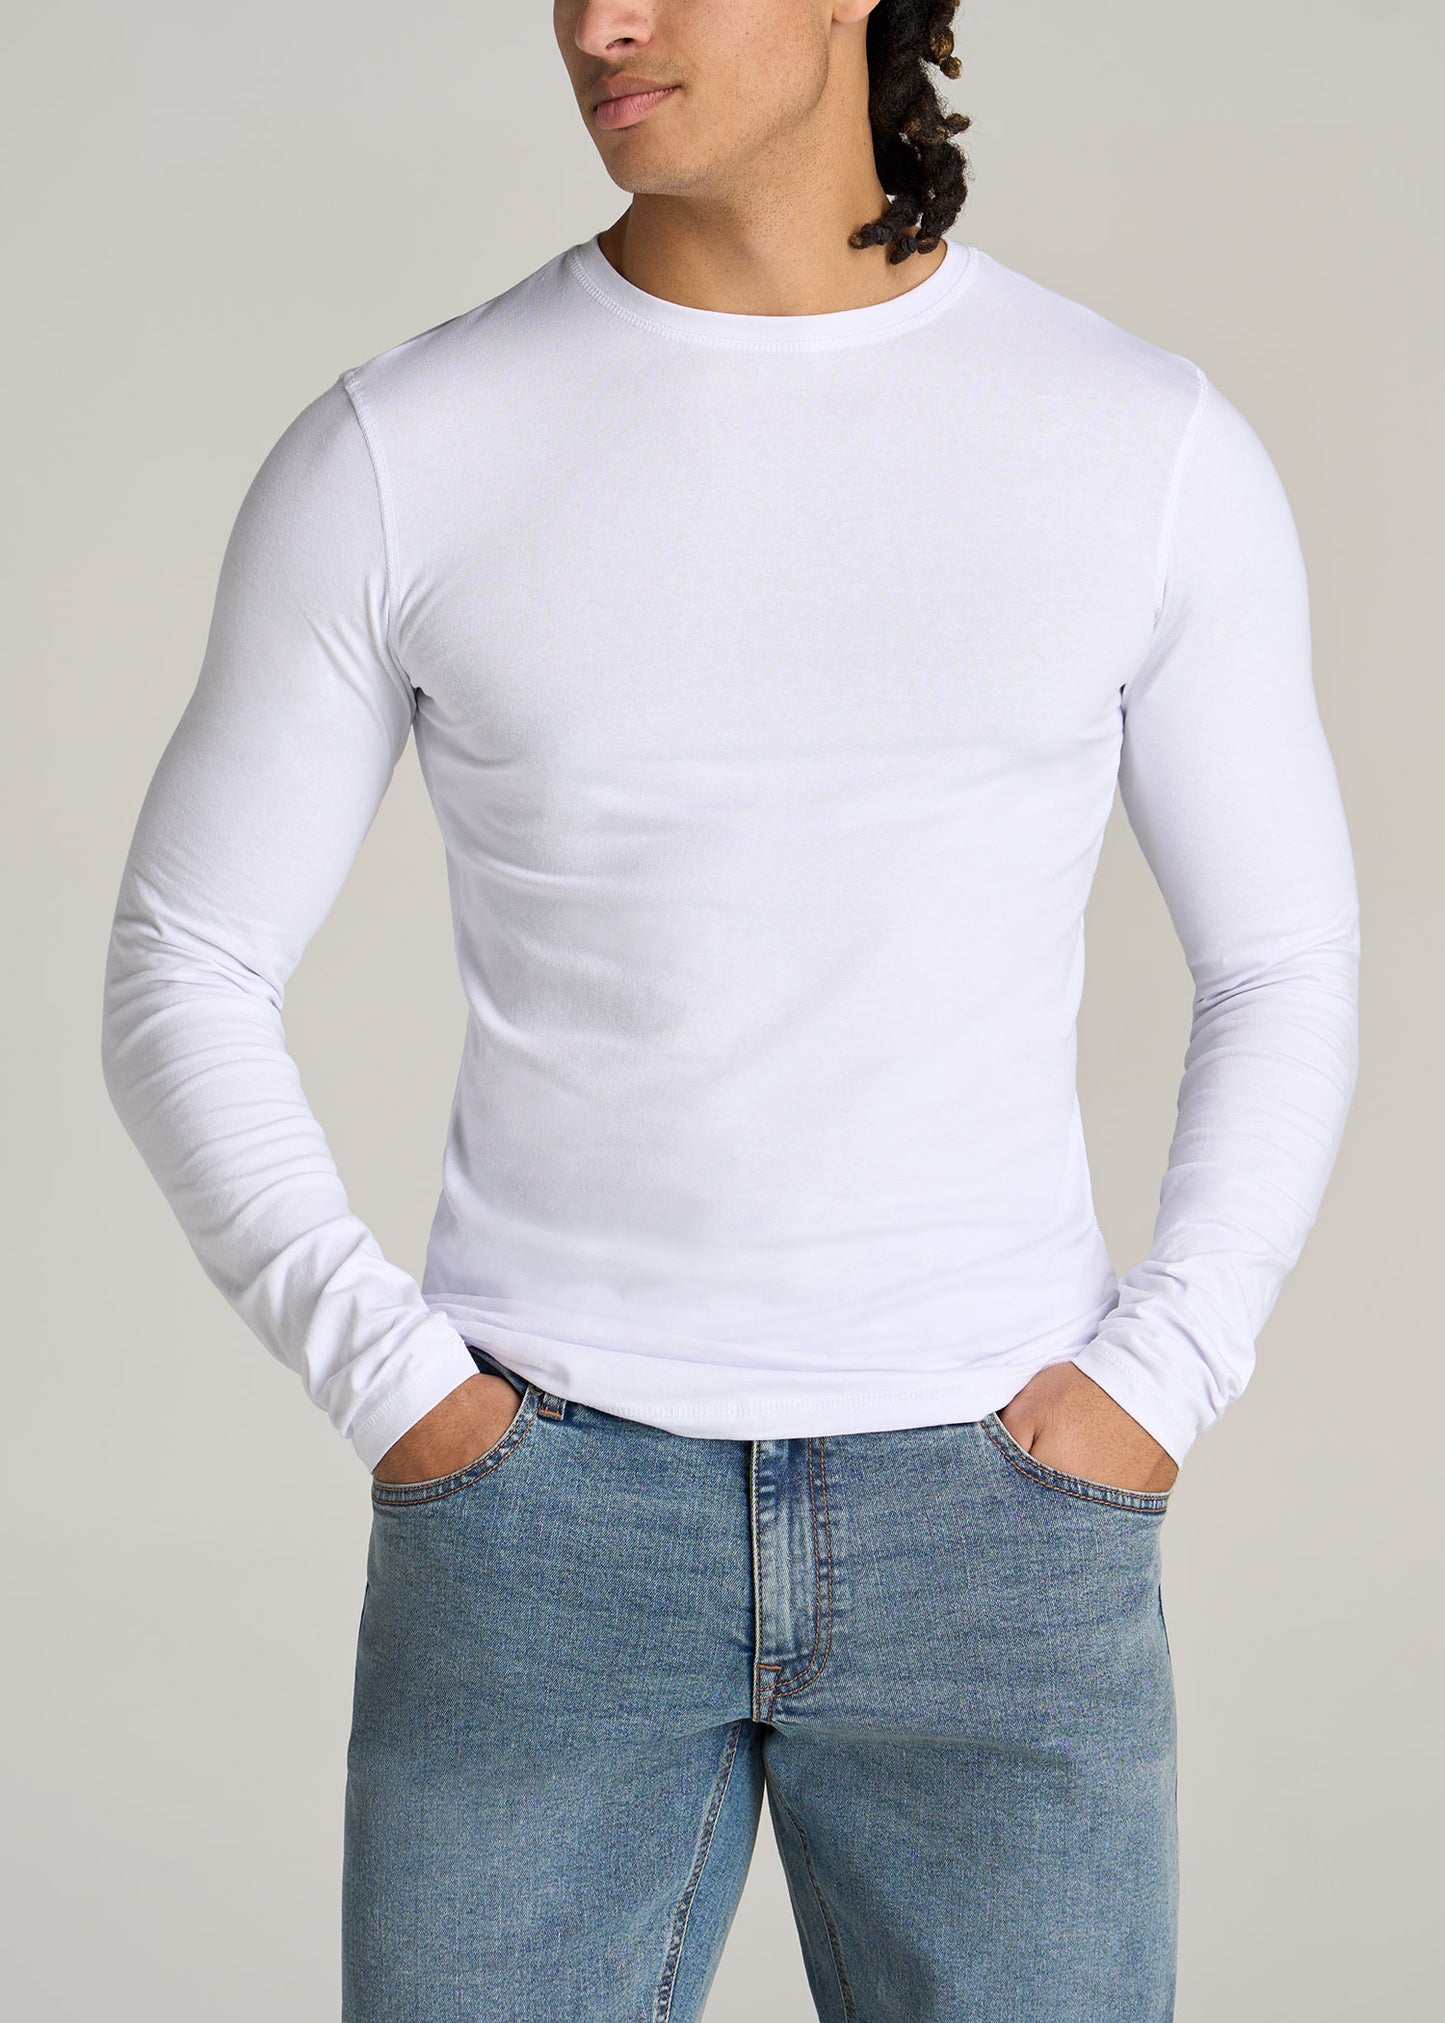 A tall man wearing American Tall's Original Essentials Slim-Fit Long Sleeve Tall Men's T-Shirt in White.